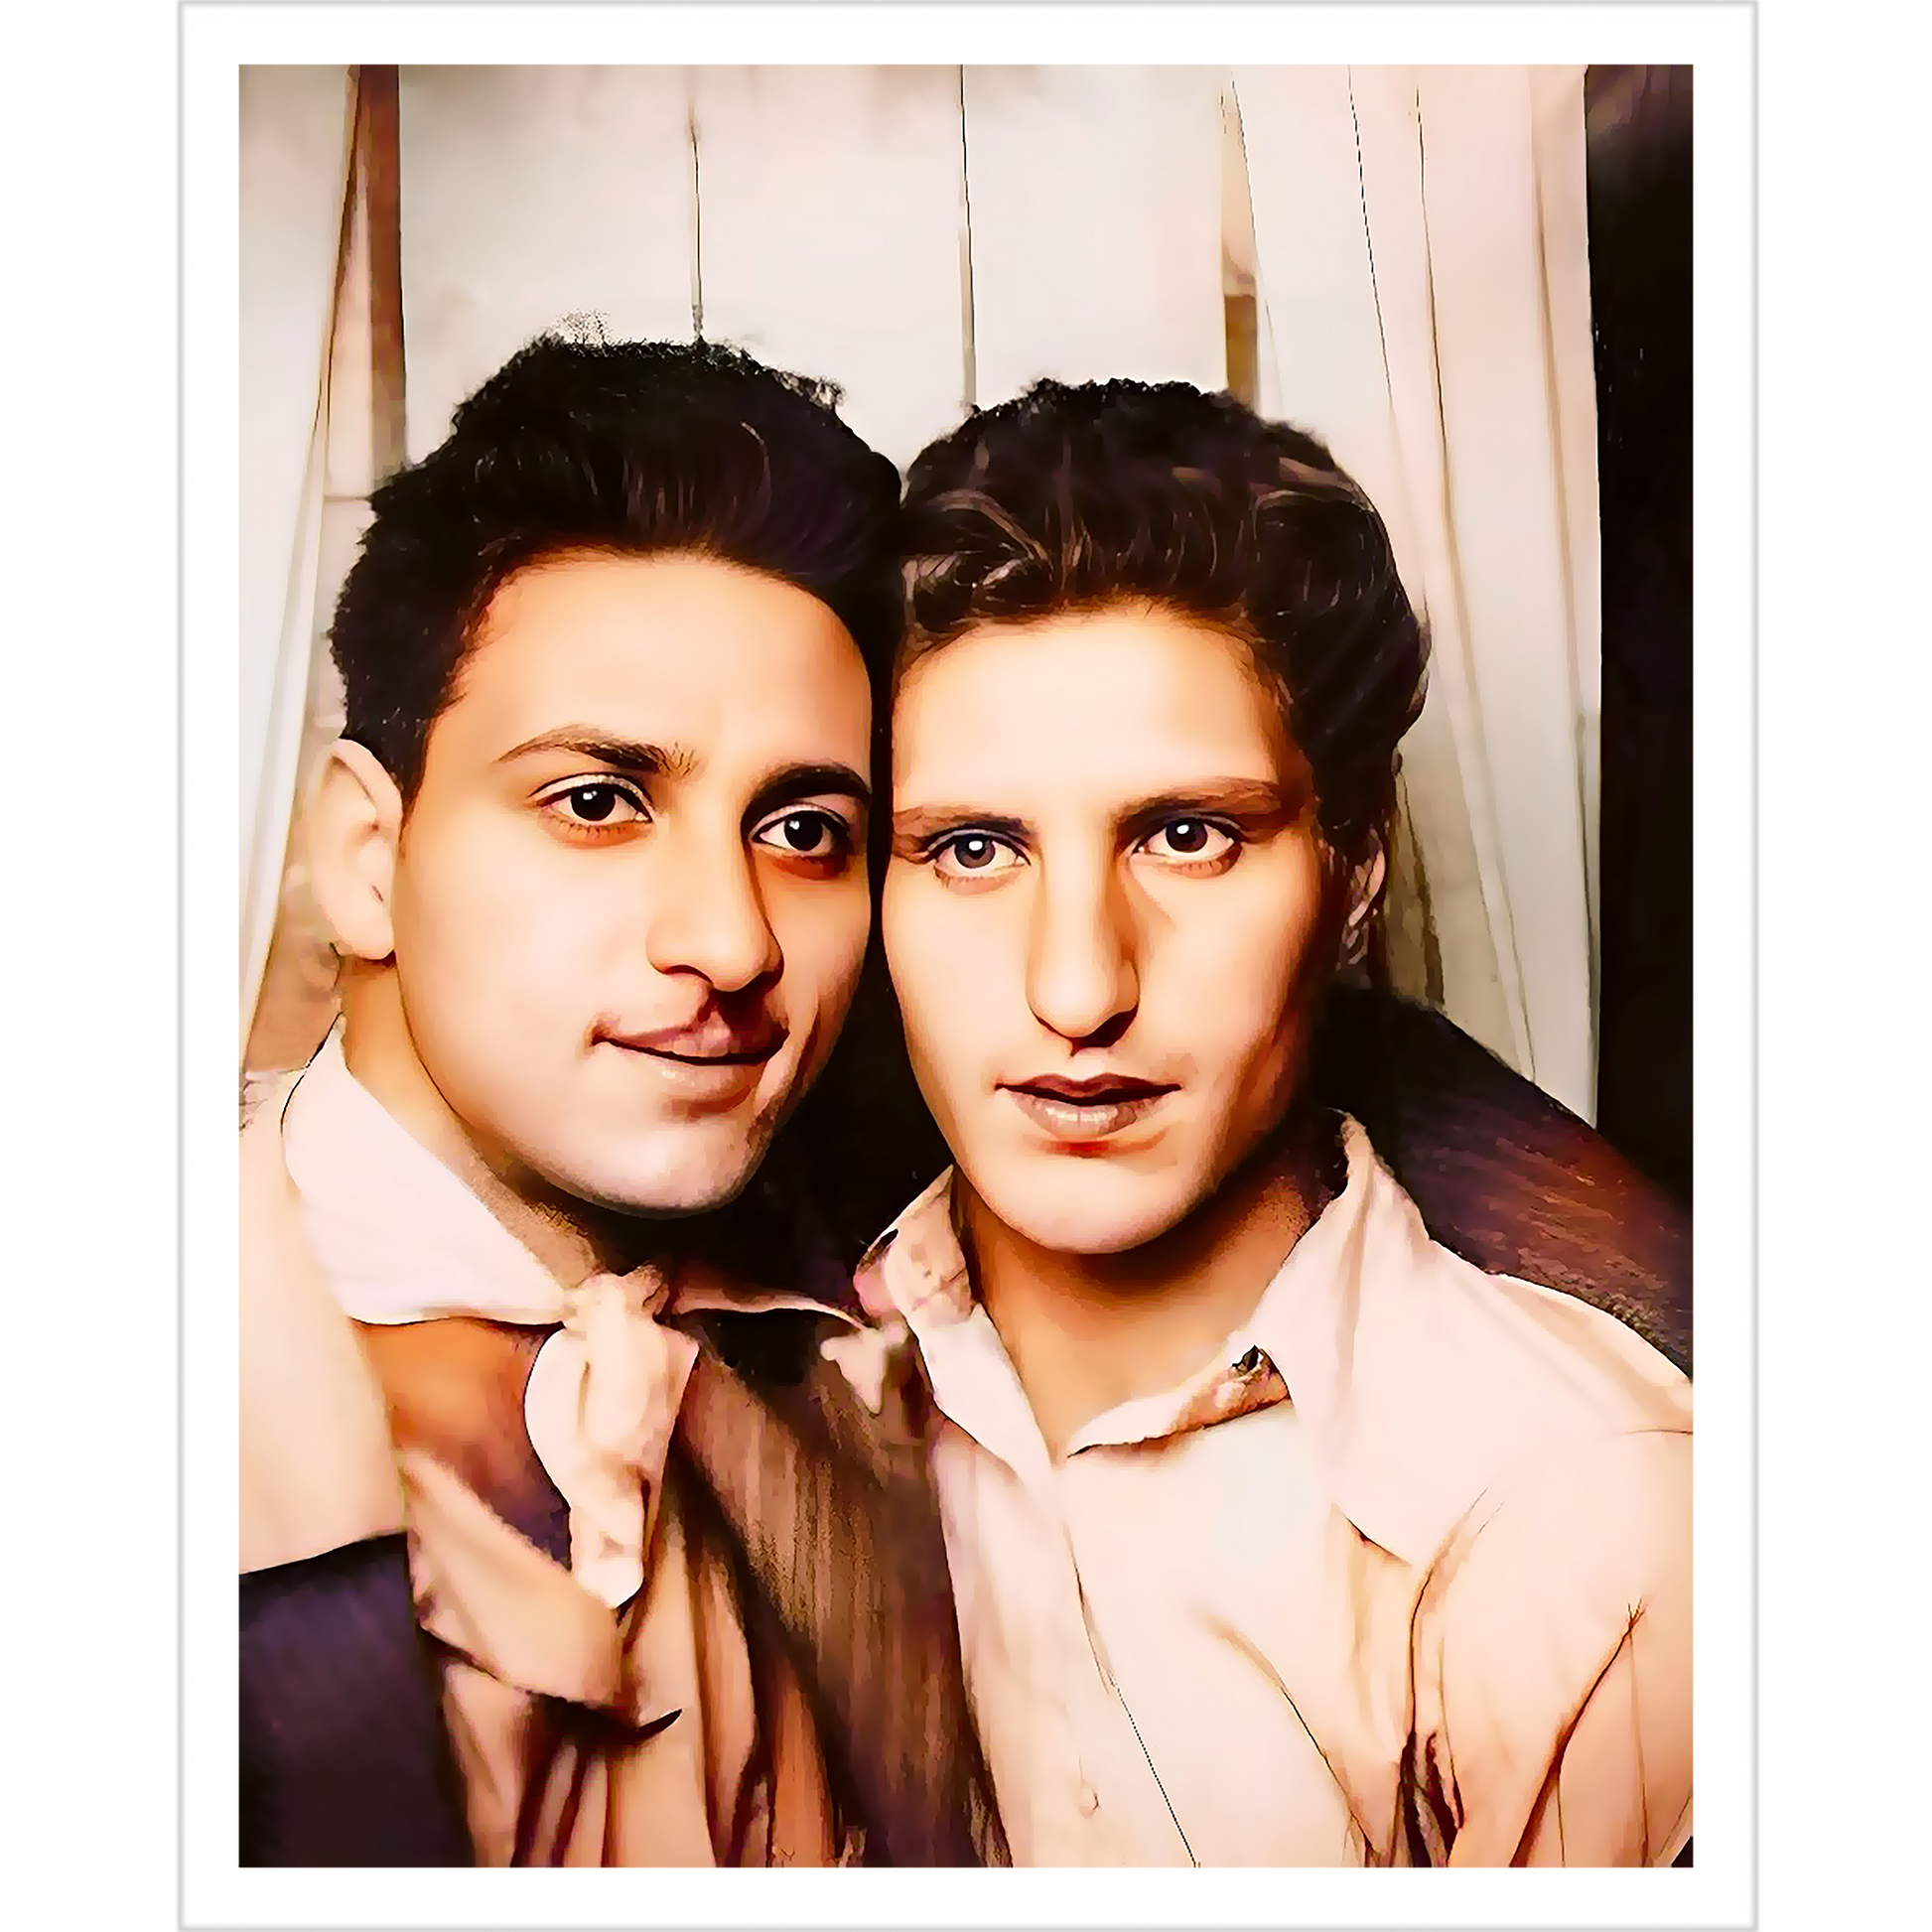 paire 029 | Giclee Artist Print Gay Vintage Affectionate Men Photo Booth Queer LGBTQ California